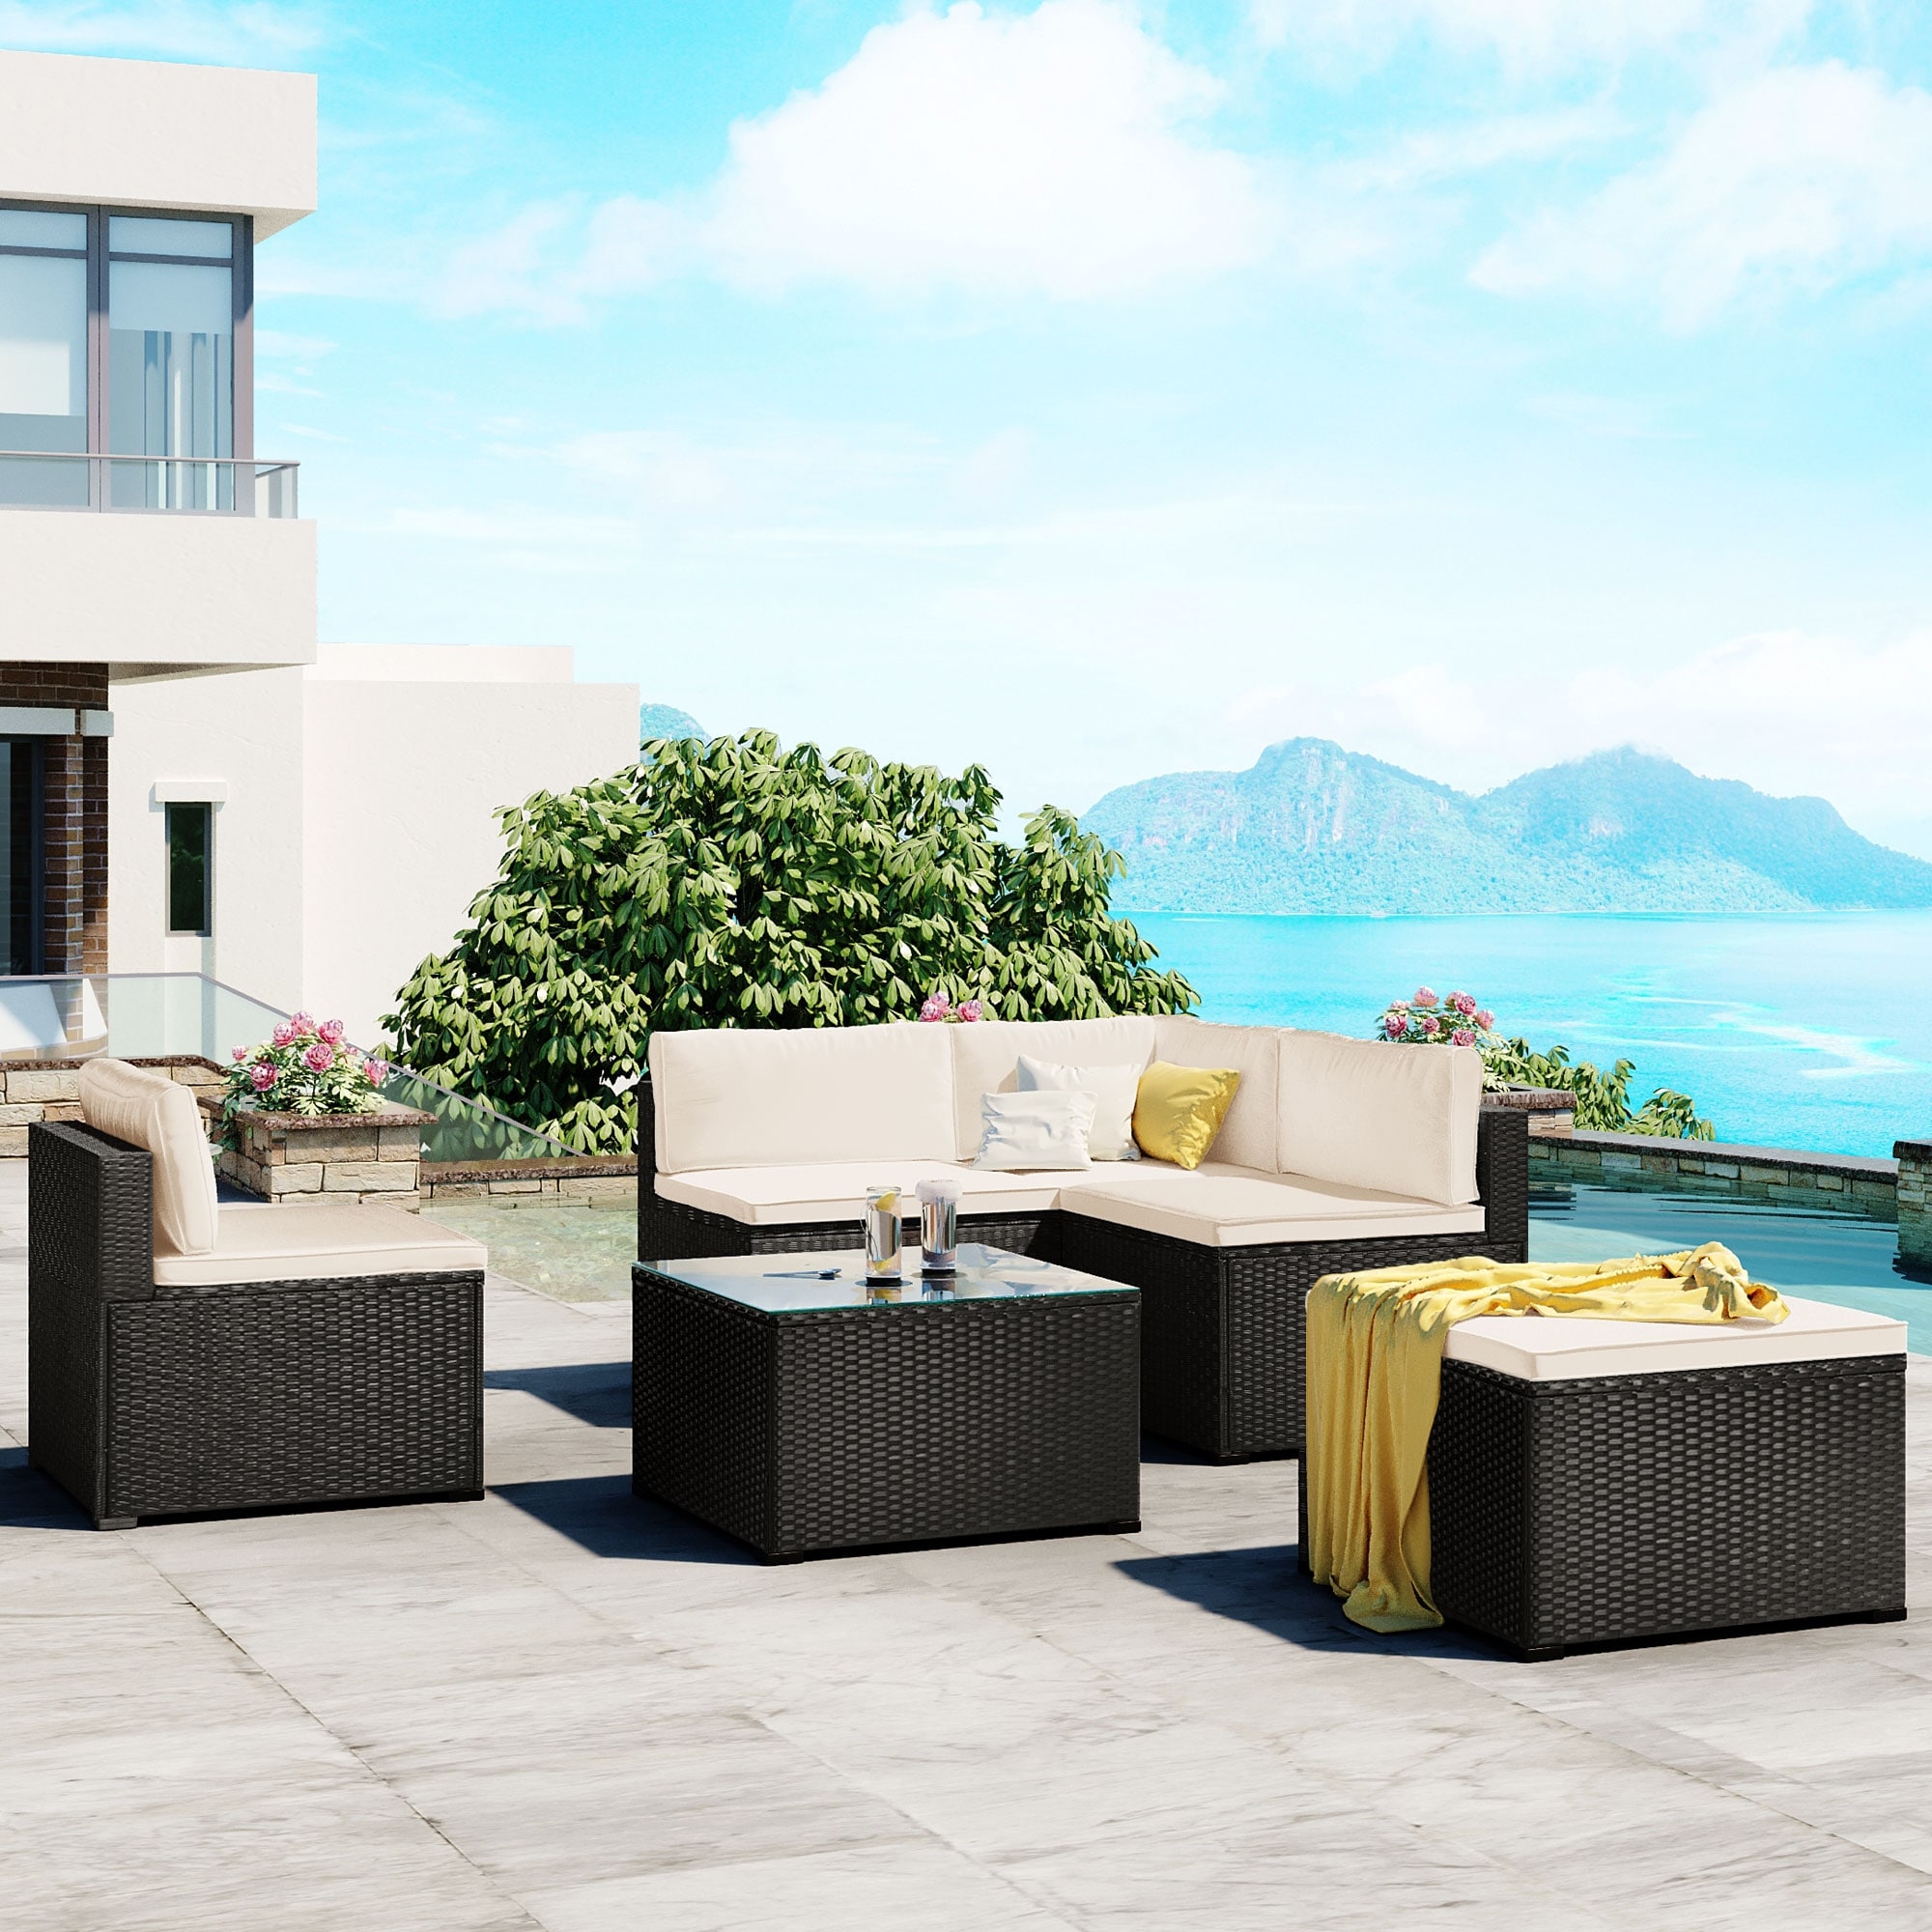 6-piece Outdoor Patio Wicker Rattan Modular Sectional Sofa Set  With Glass Tabletop Coffee Table  Removable Grey Cushion